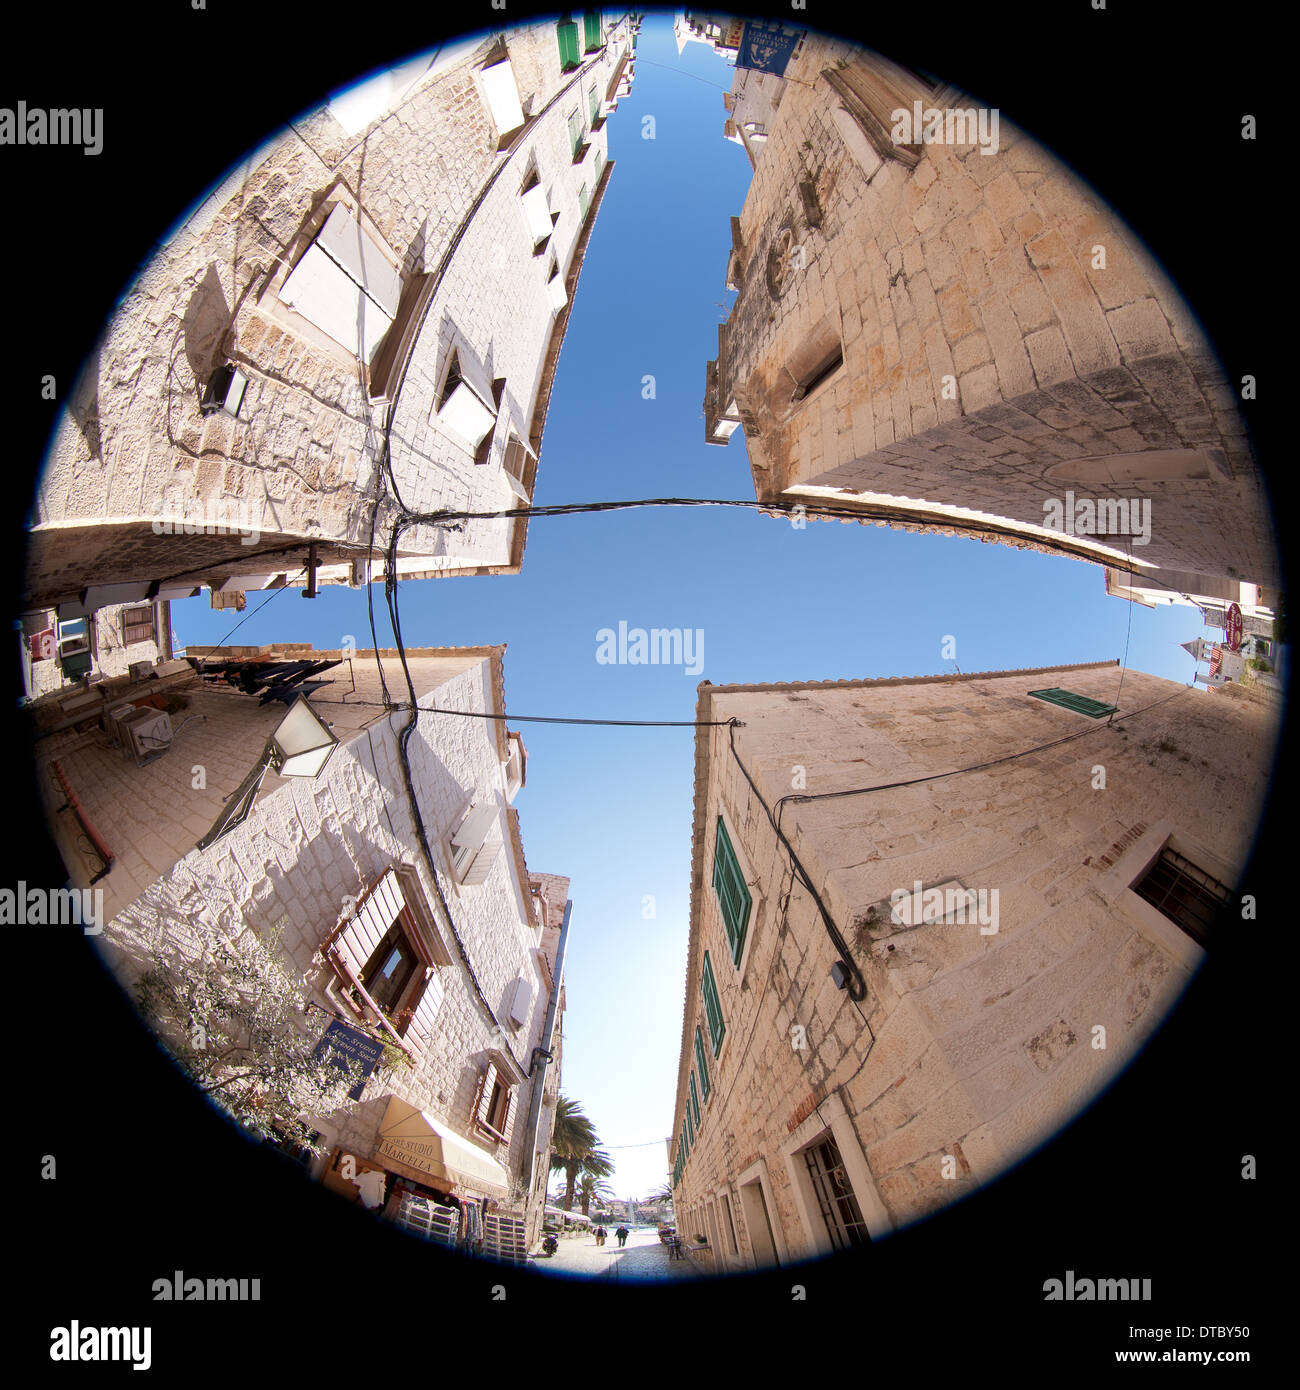 At a crossroad looking up with 360 degree view Stock Photo